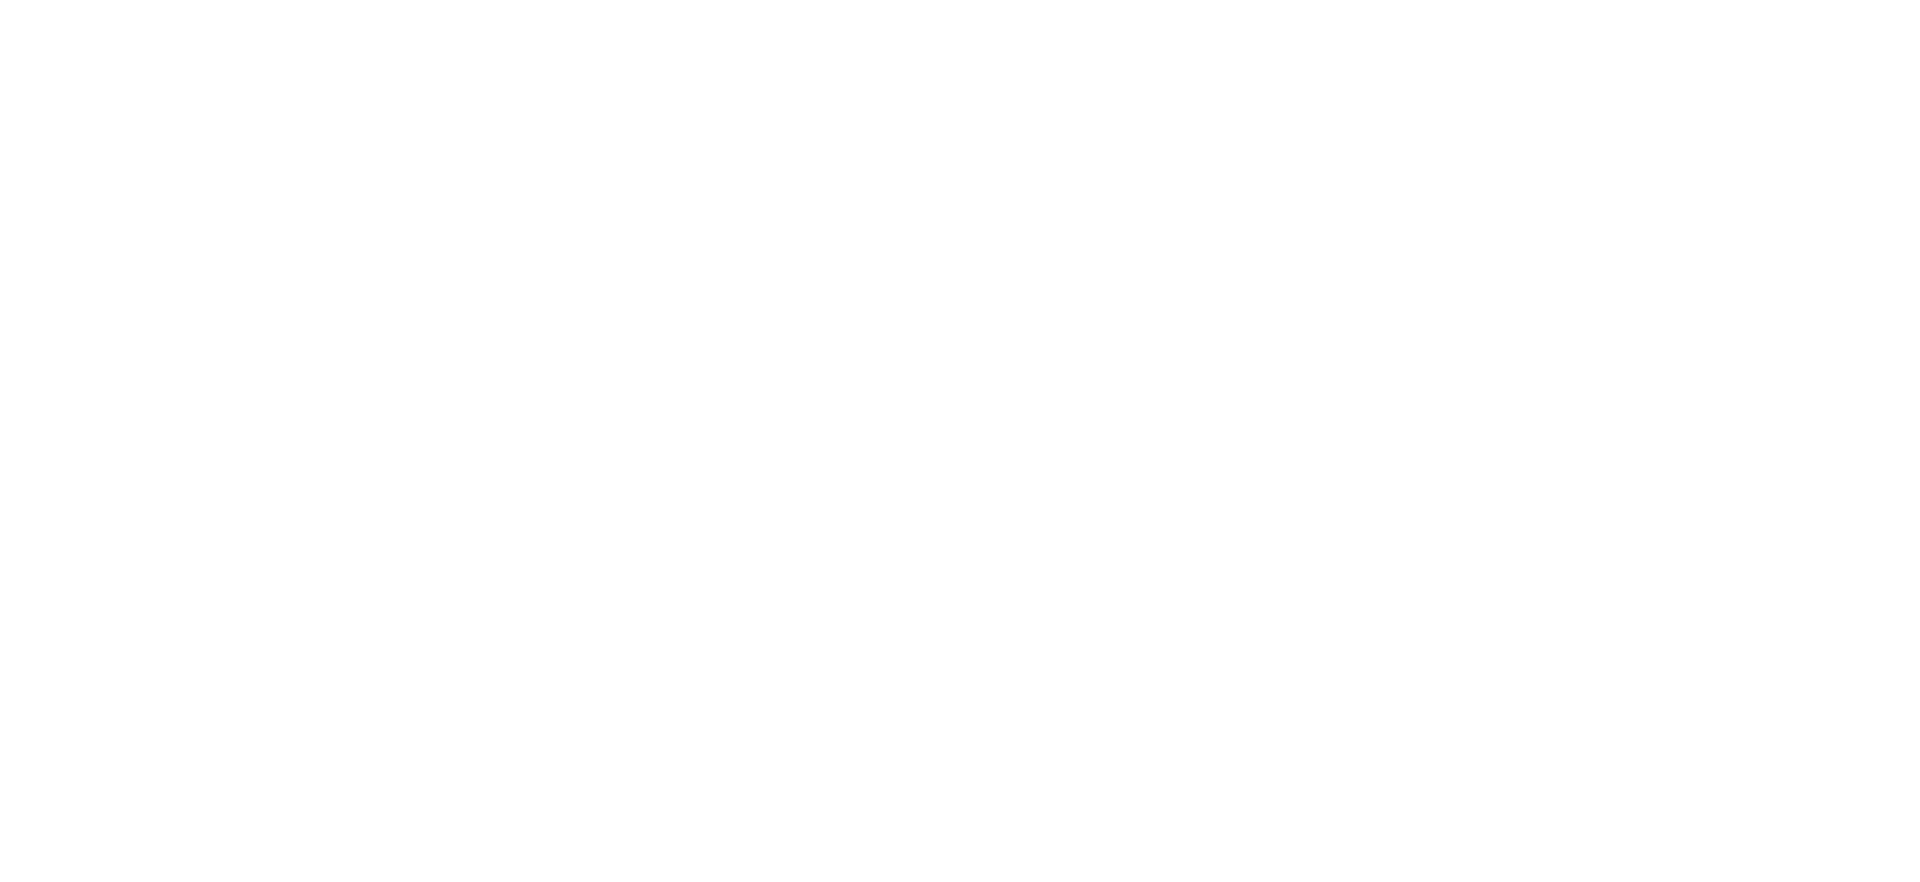 Pro tip: pop your favorite bar in the freezer for a cooled-down level-up.